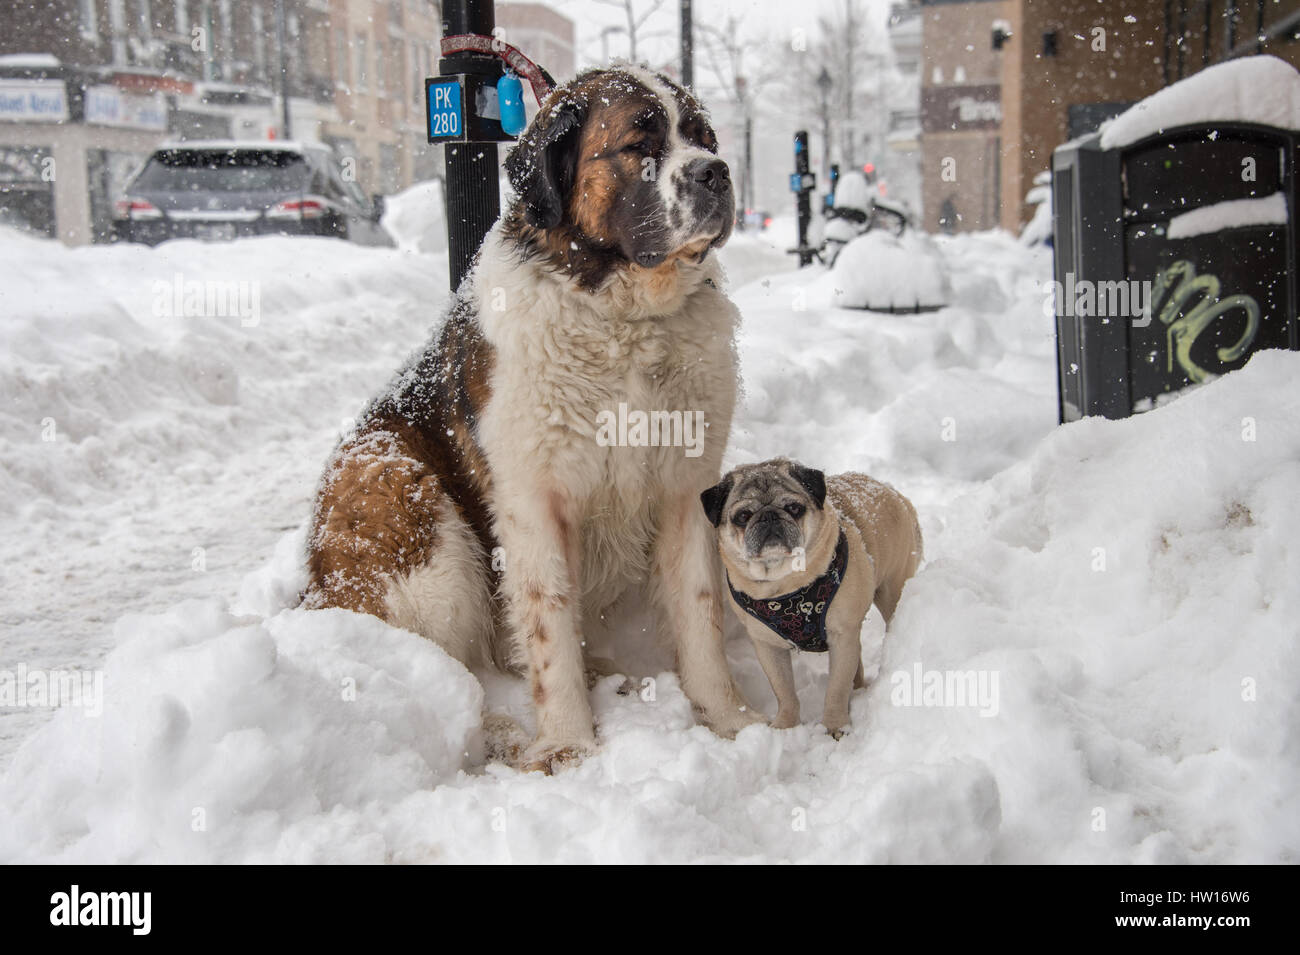 Montreal, CA - 15 March 2017: Two dogs waiting for owner in Montreal, during snow storm Stock Photo